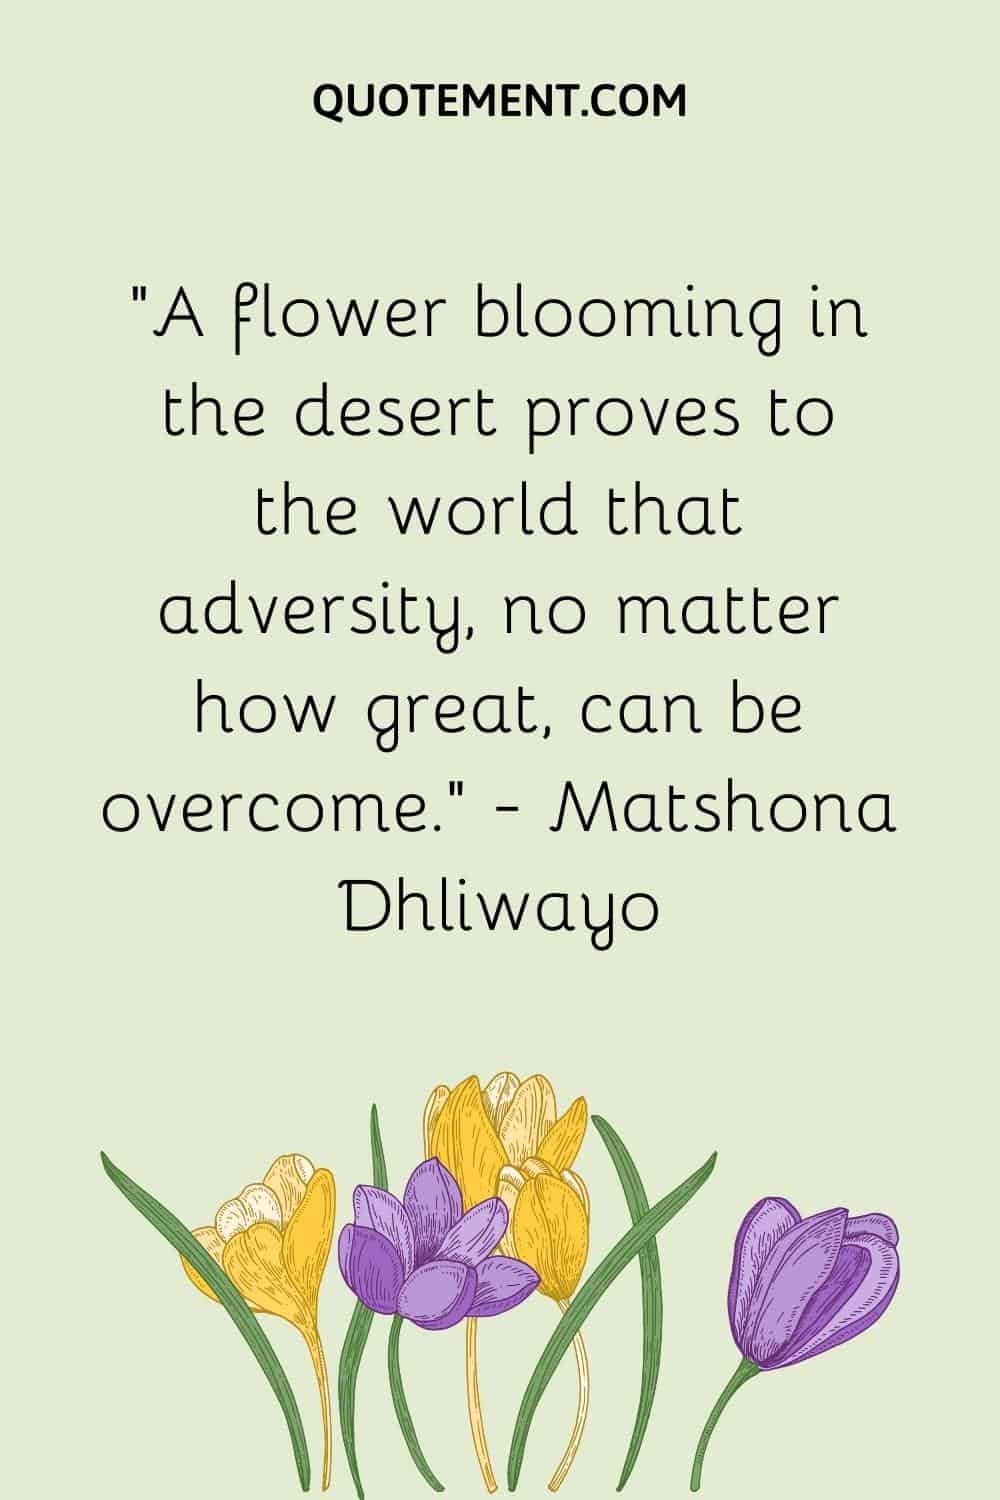 “A flower blooming in the desert proves to the world that adversity, no matter how great, can be overcome.” — Matshona Dhliwayo